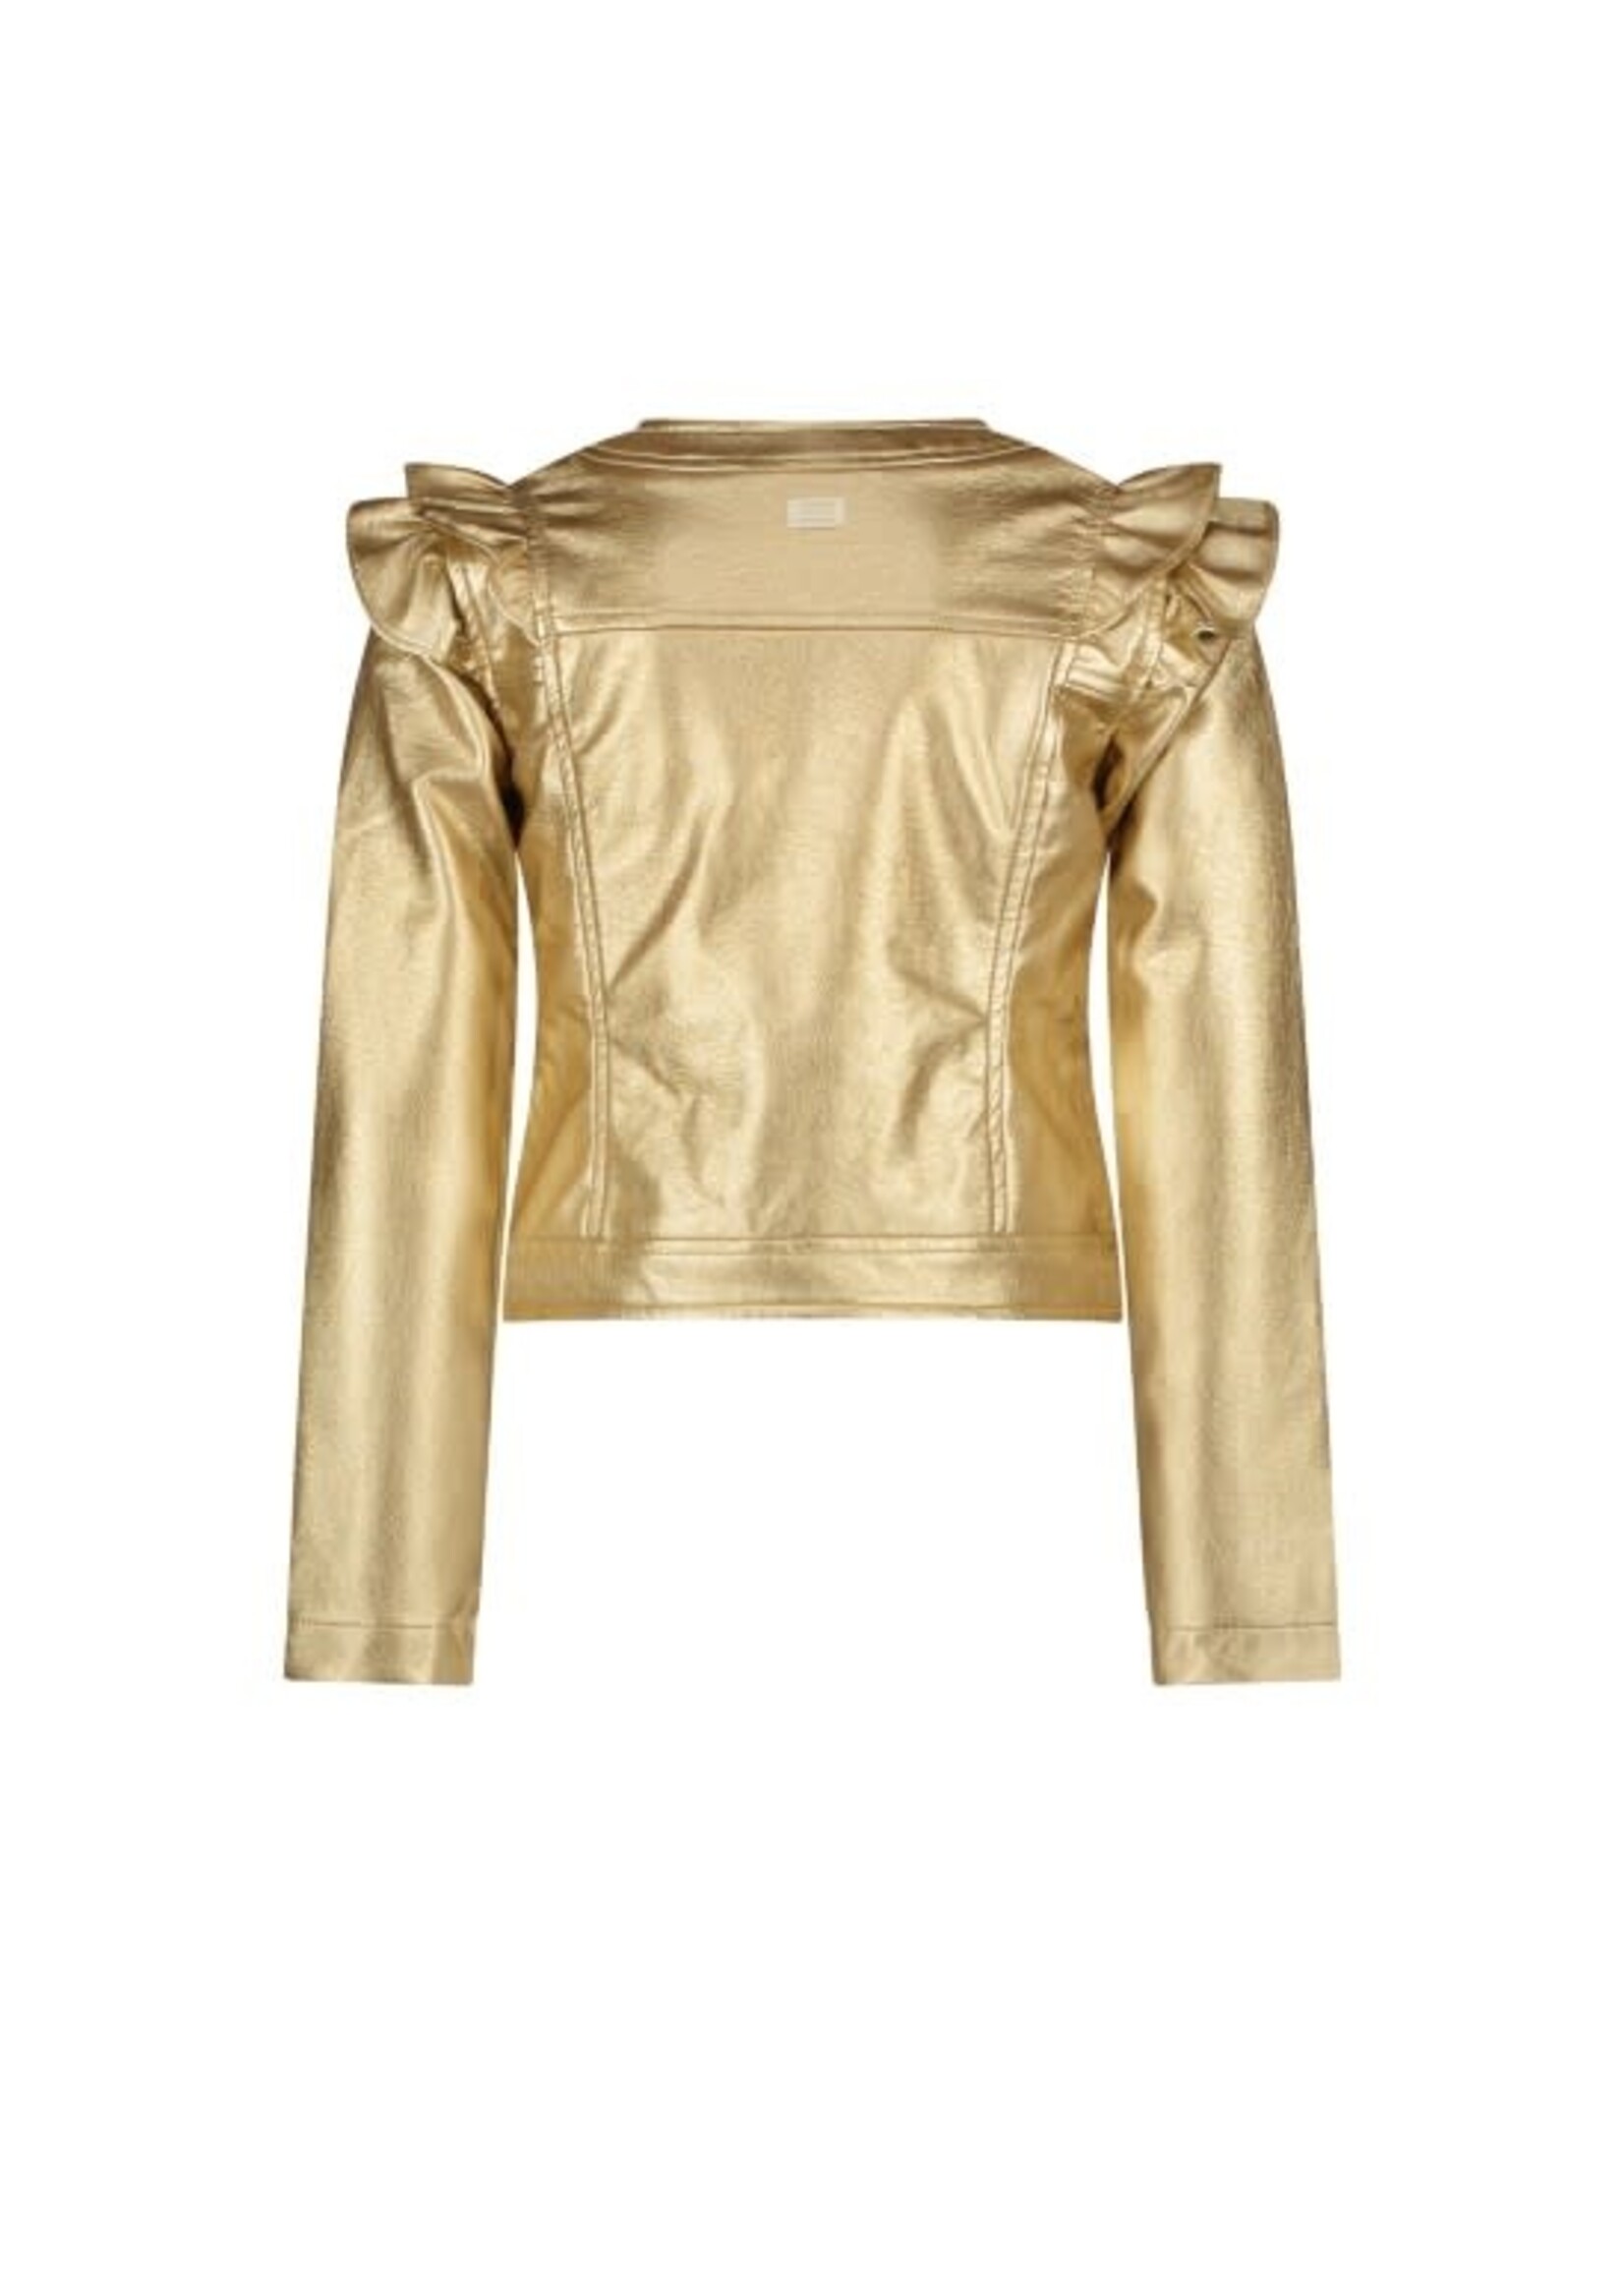 Le Chic Le Chic ARLYN gold fake leather jacket C312-5120 Champagne